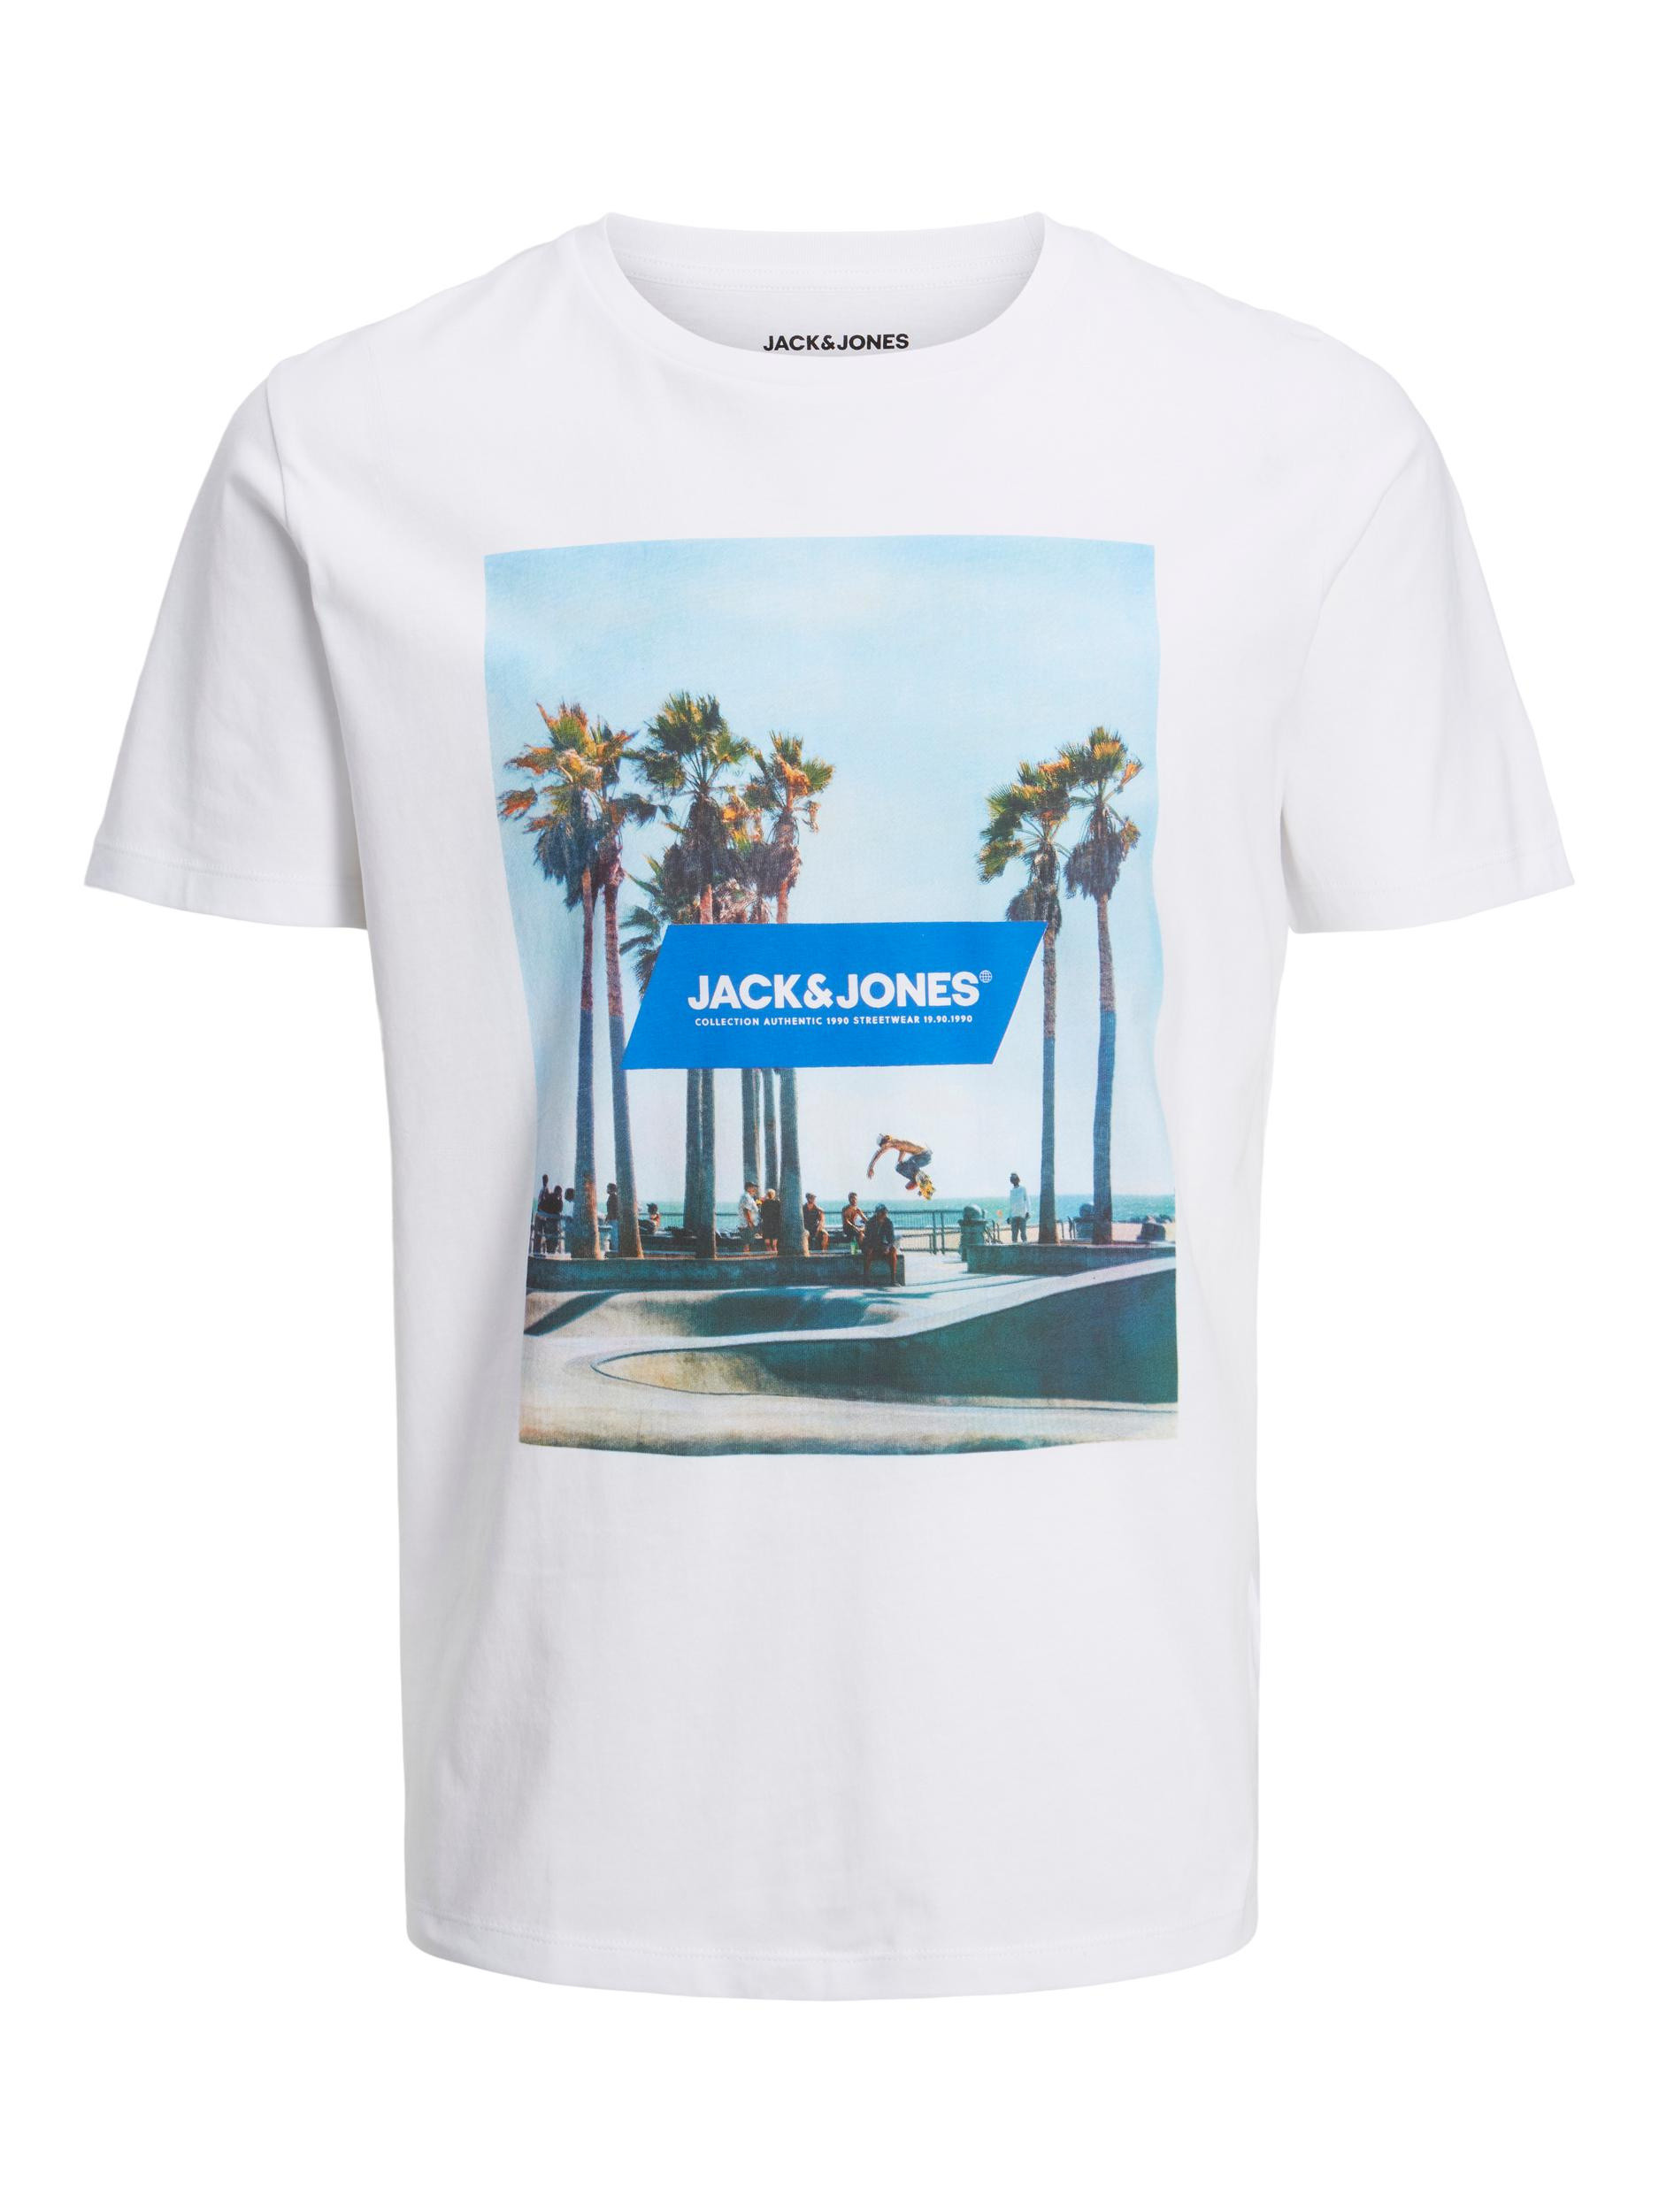 Jack & Jones - T-shirt con stampa in cotone, Bianco, large image number 0